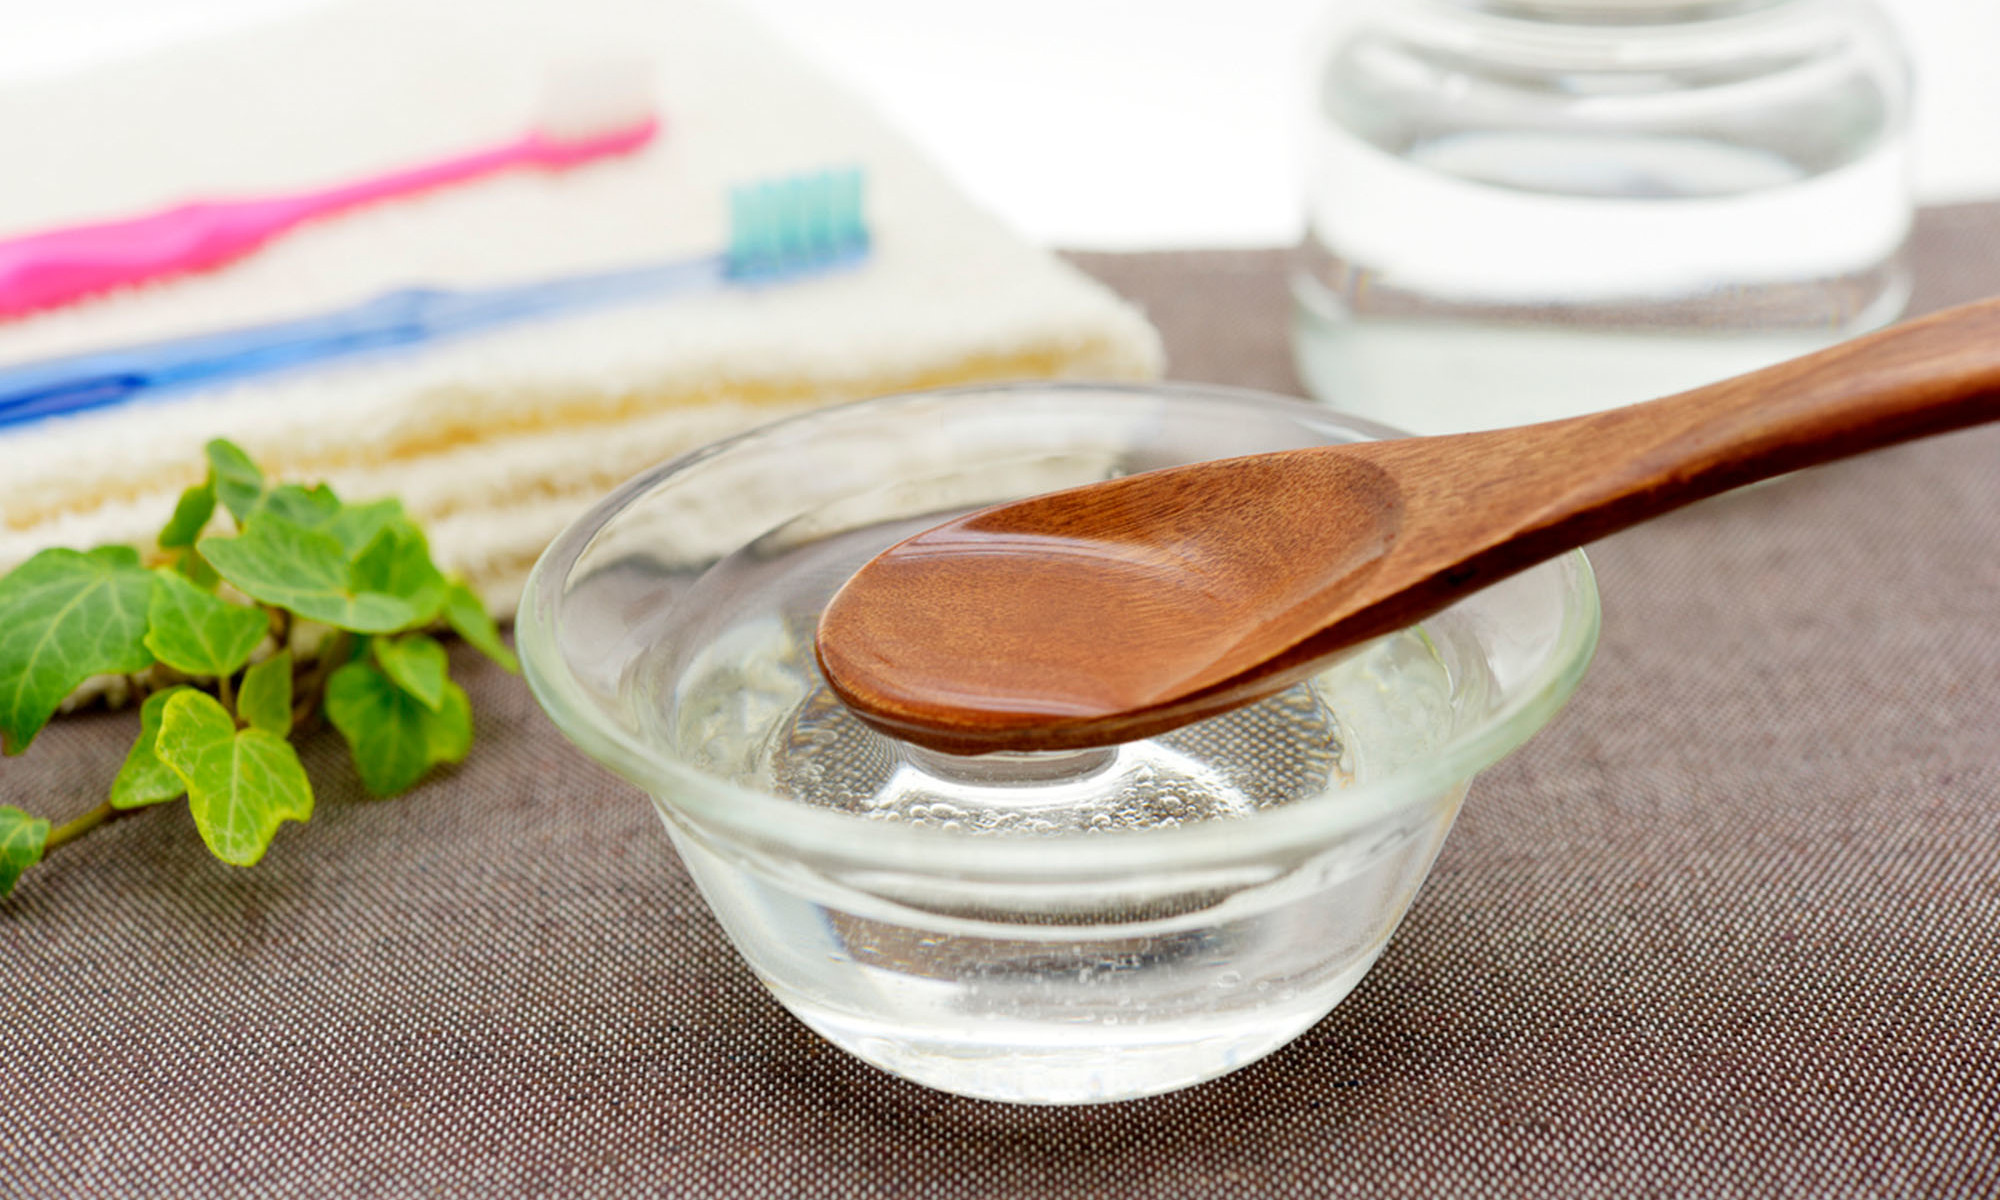 6 Benefits Of Oil Pulling + The How-To, From Dentists